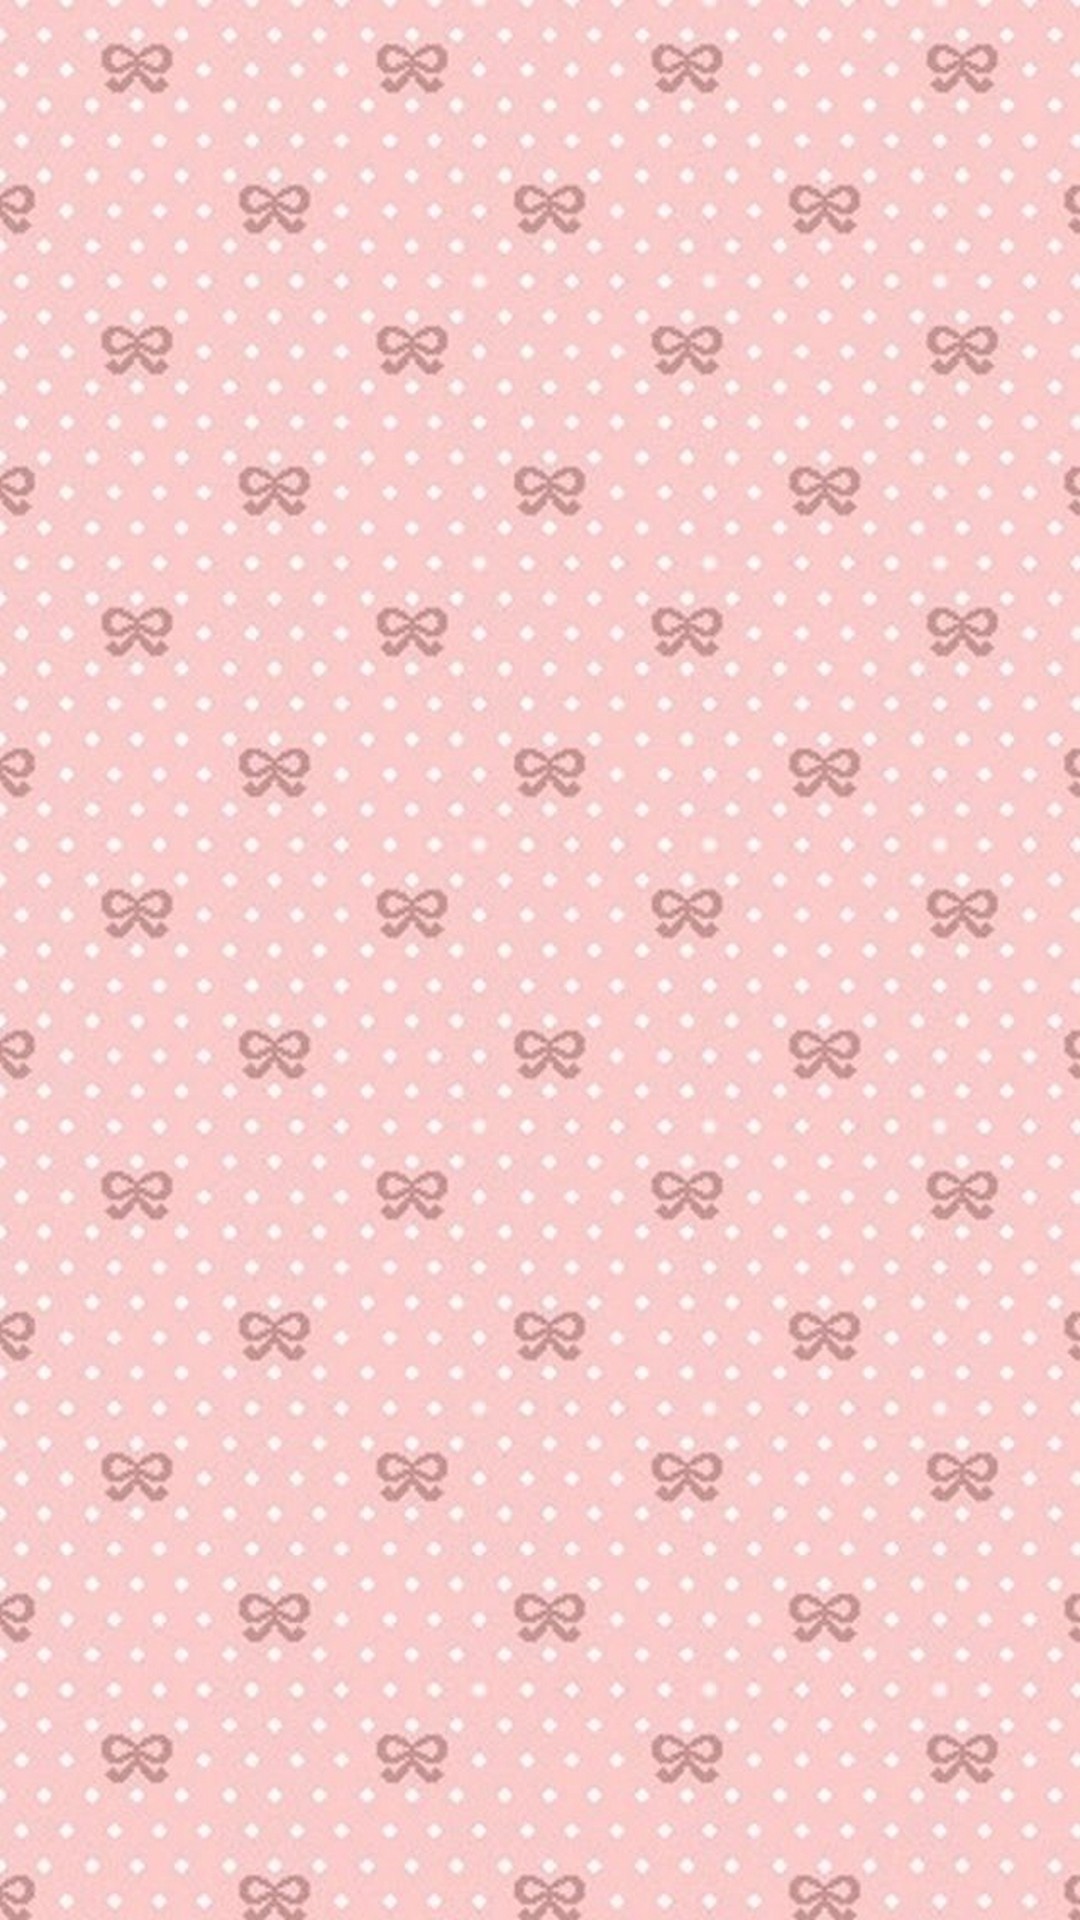 Pink Wallpaper Cute Girly For Android